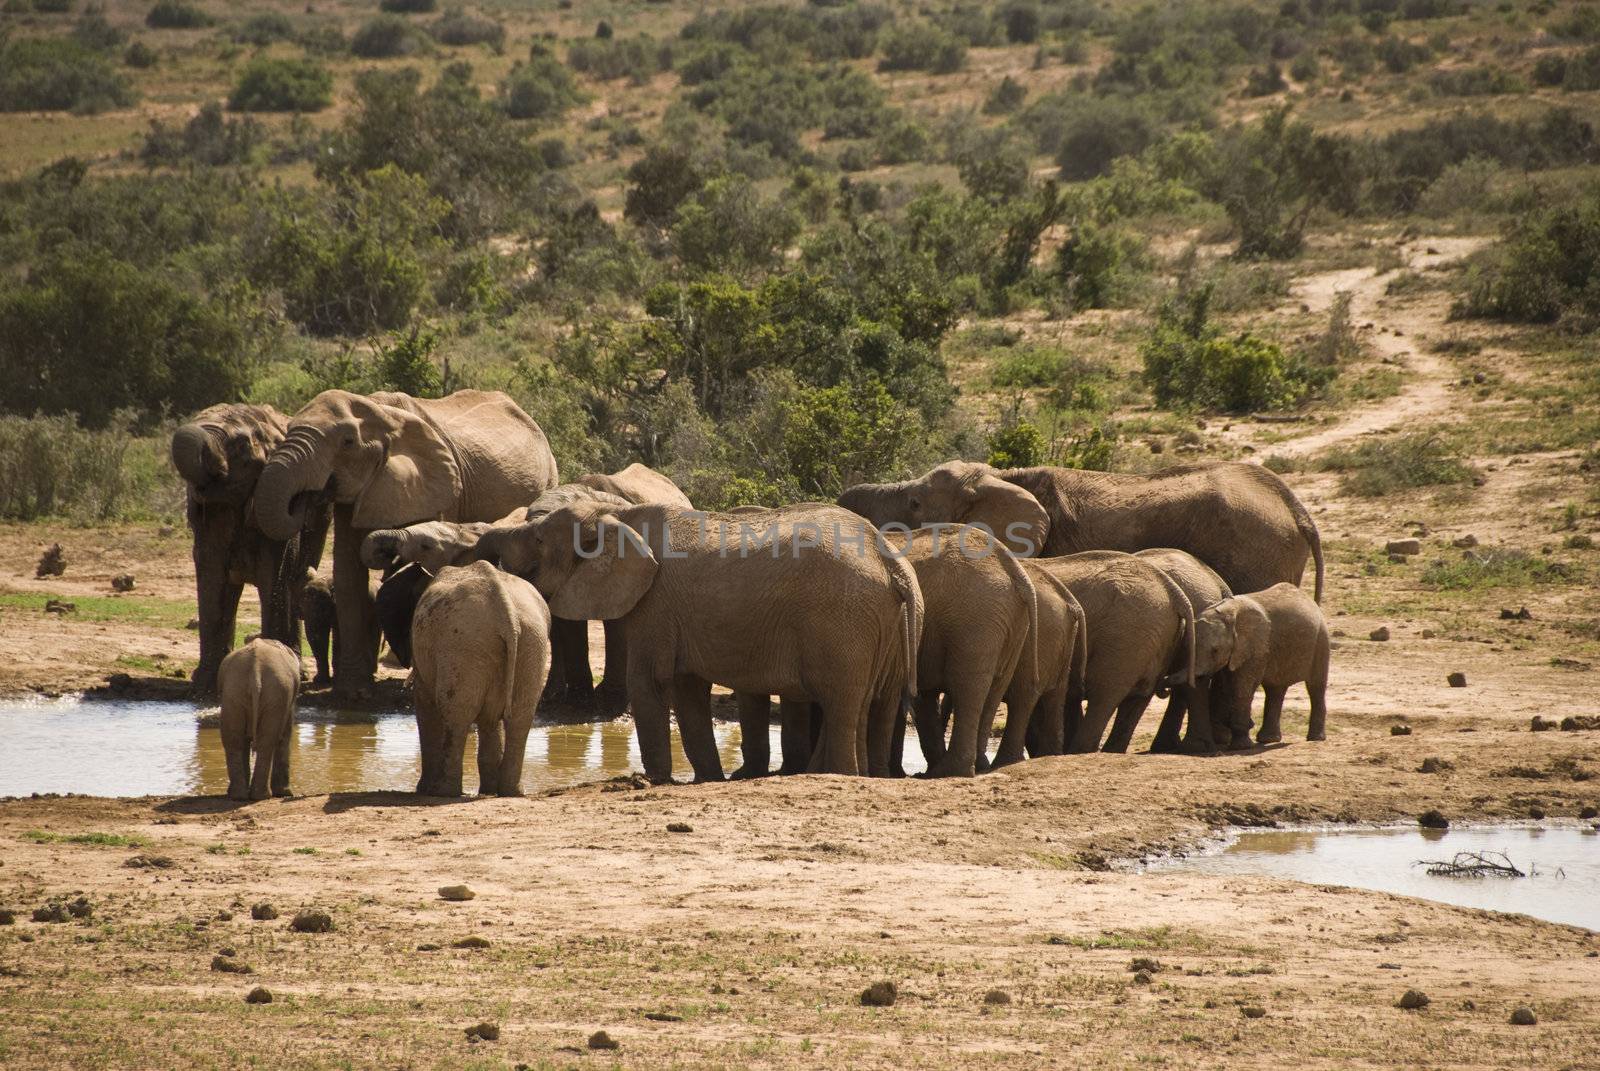 Elephant herd at water hole by tish1